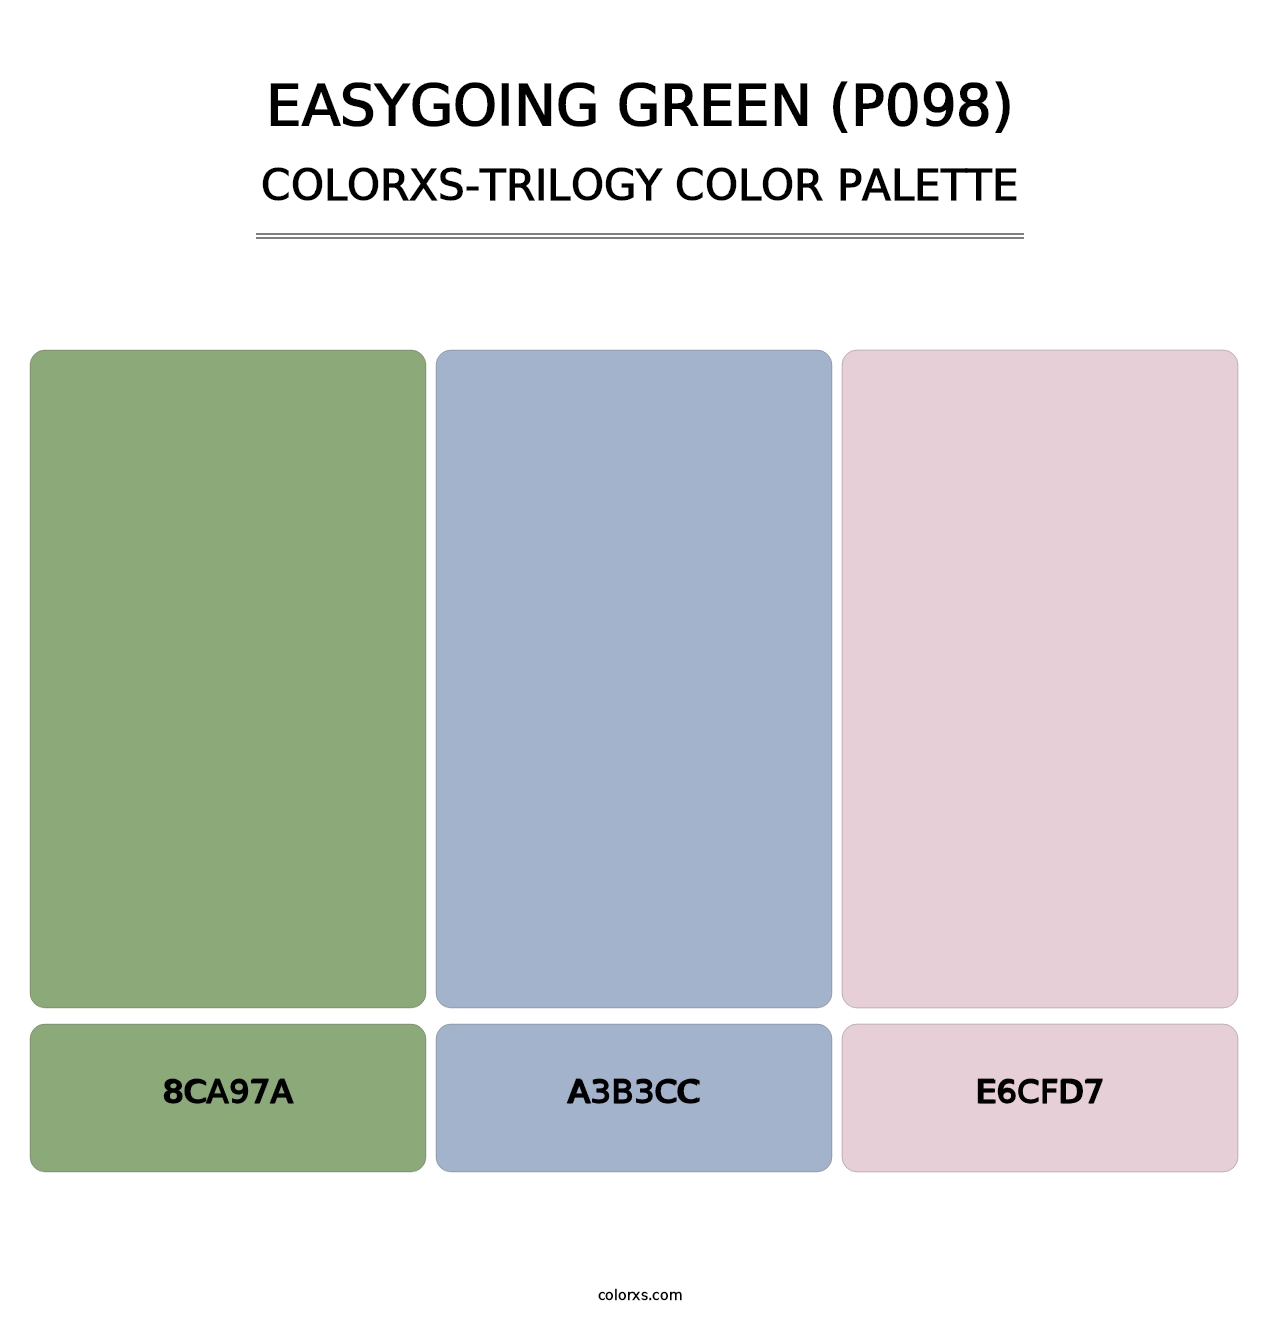 Easygoing Green (P098) - Colorxs Trilogy Palette